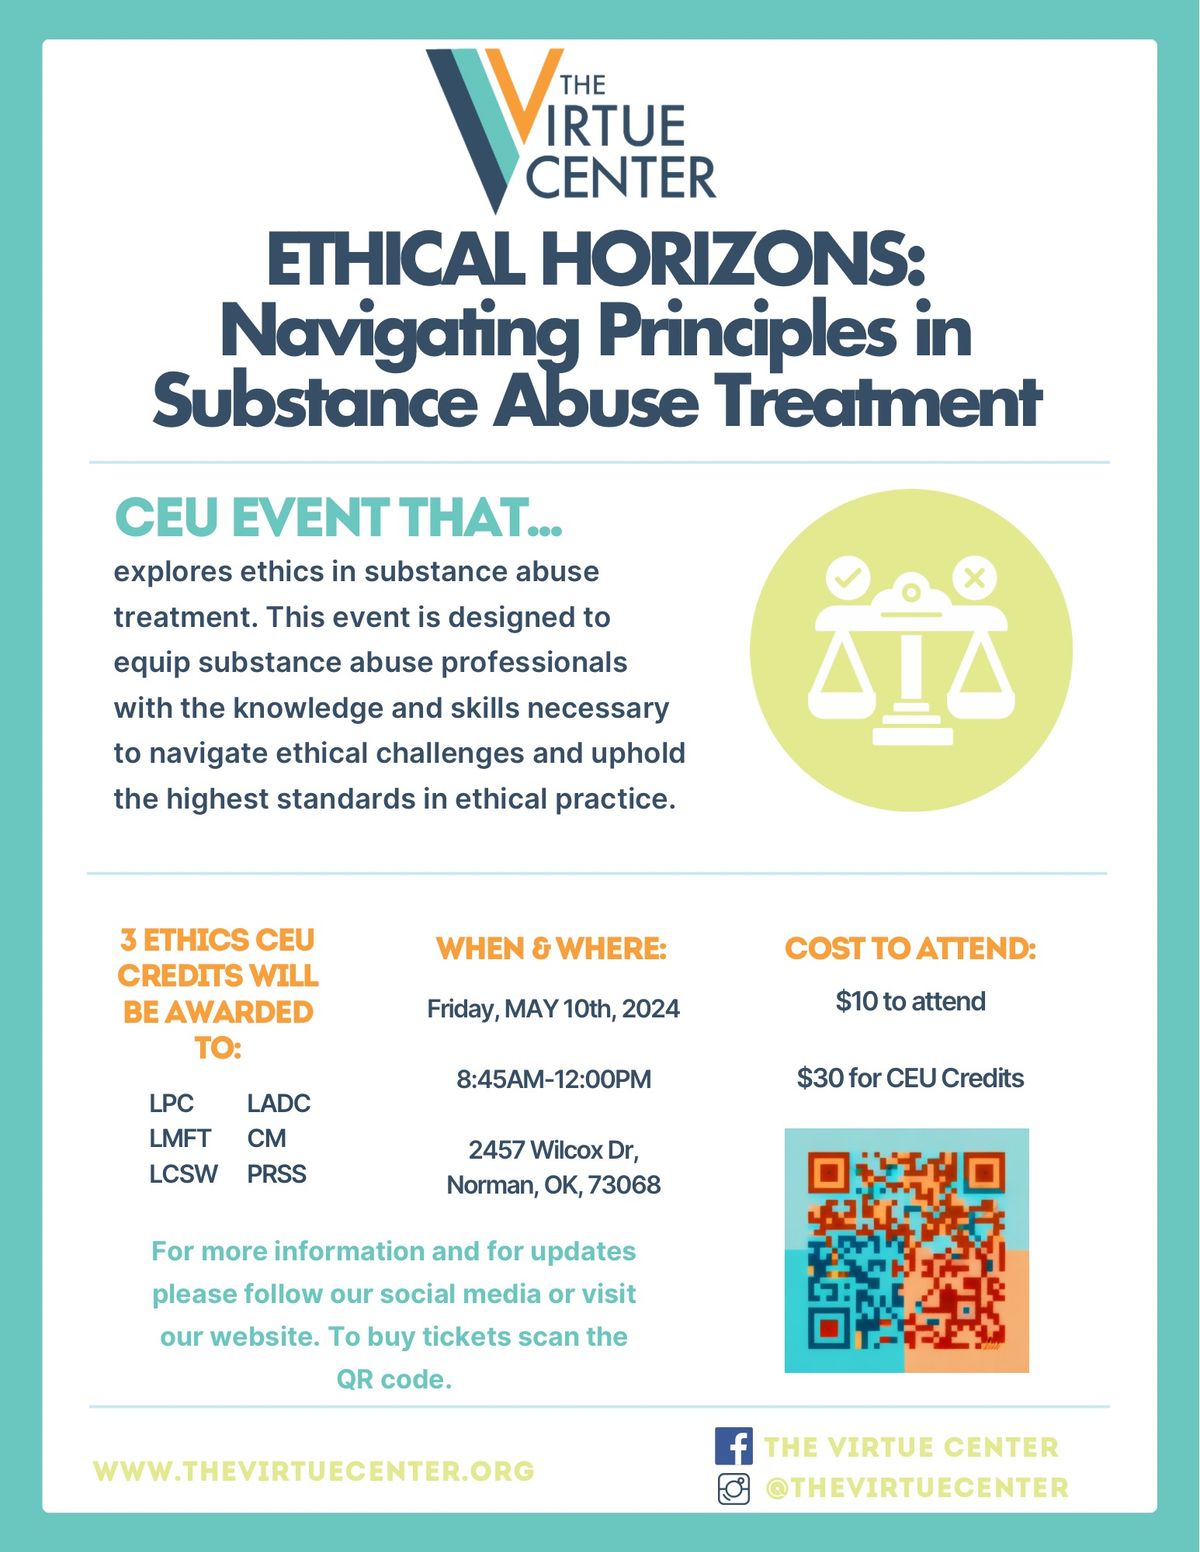 Ethical Horizons: Navigating Principles in Substance Abuse Treatment